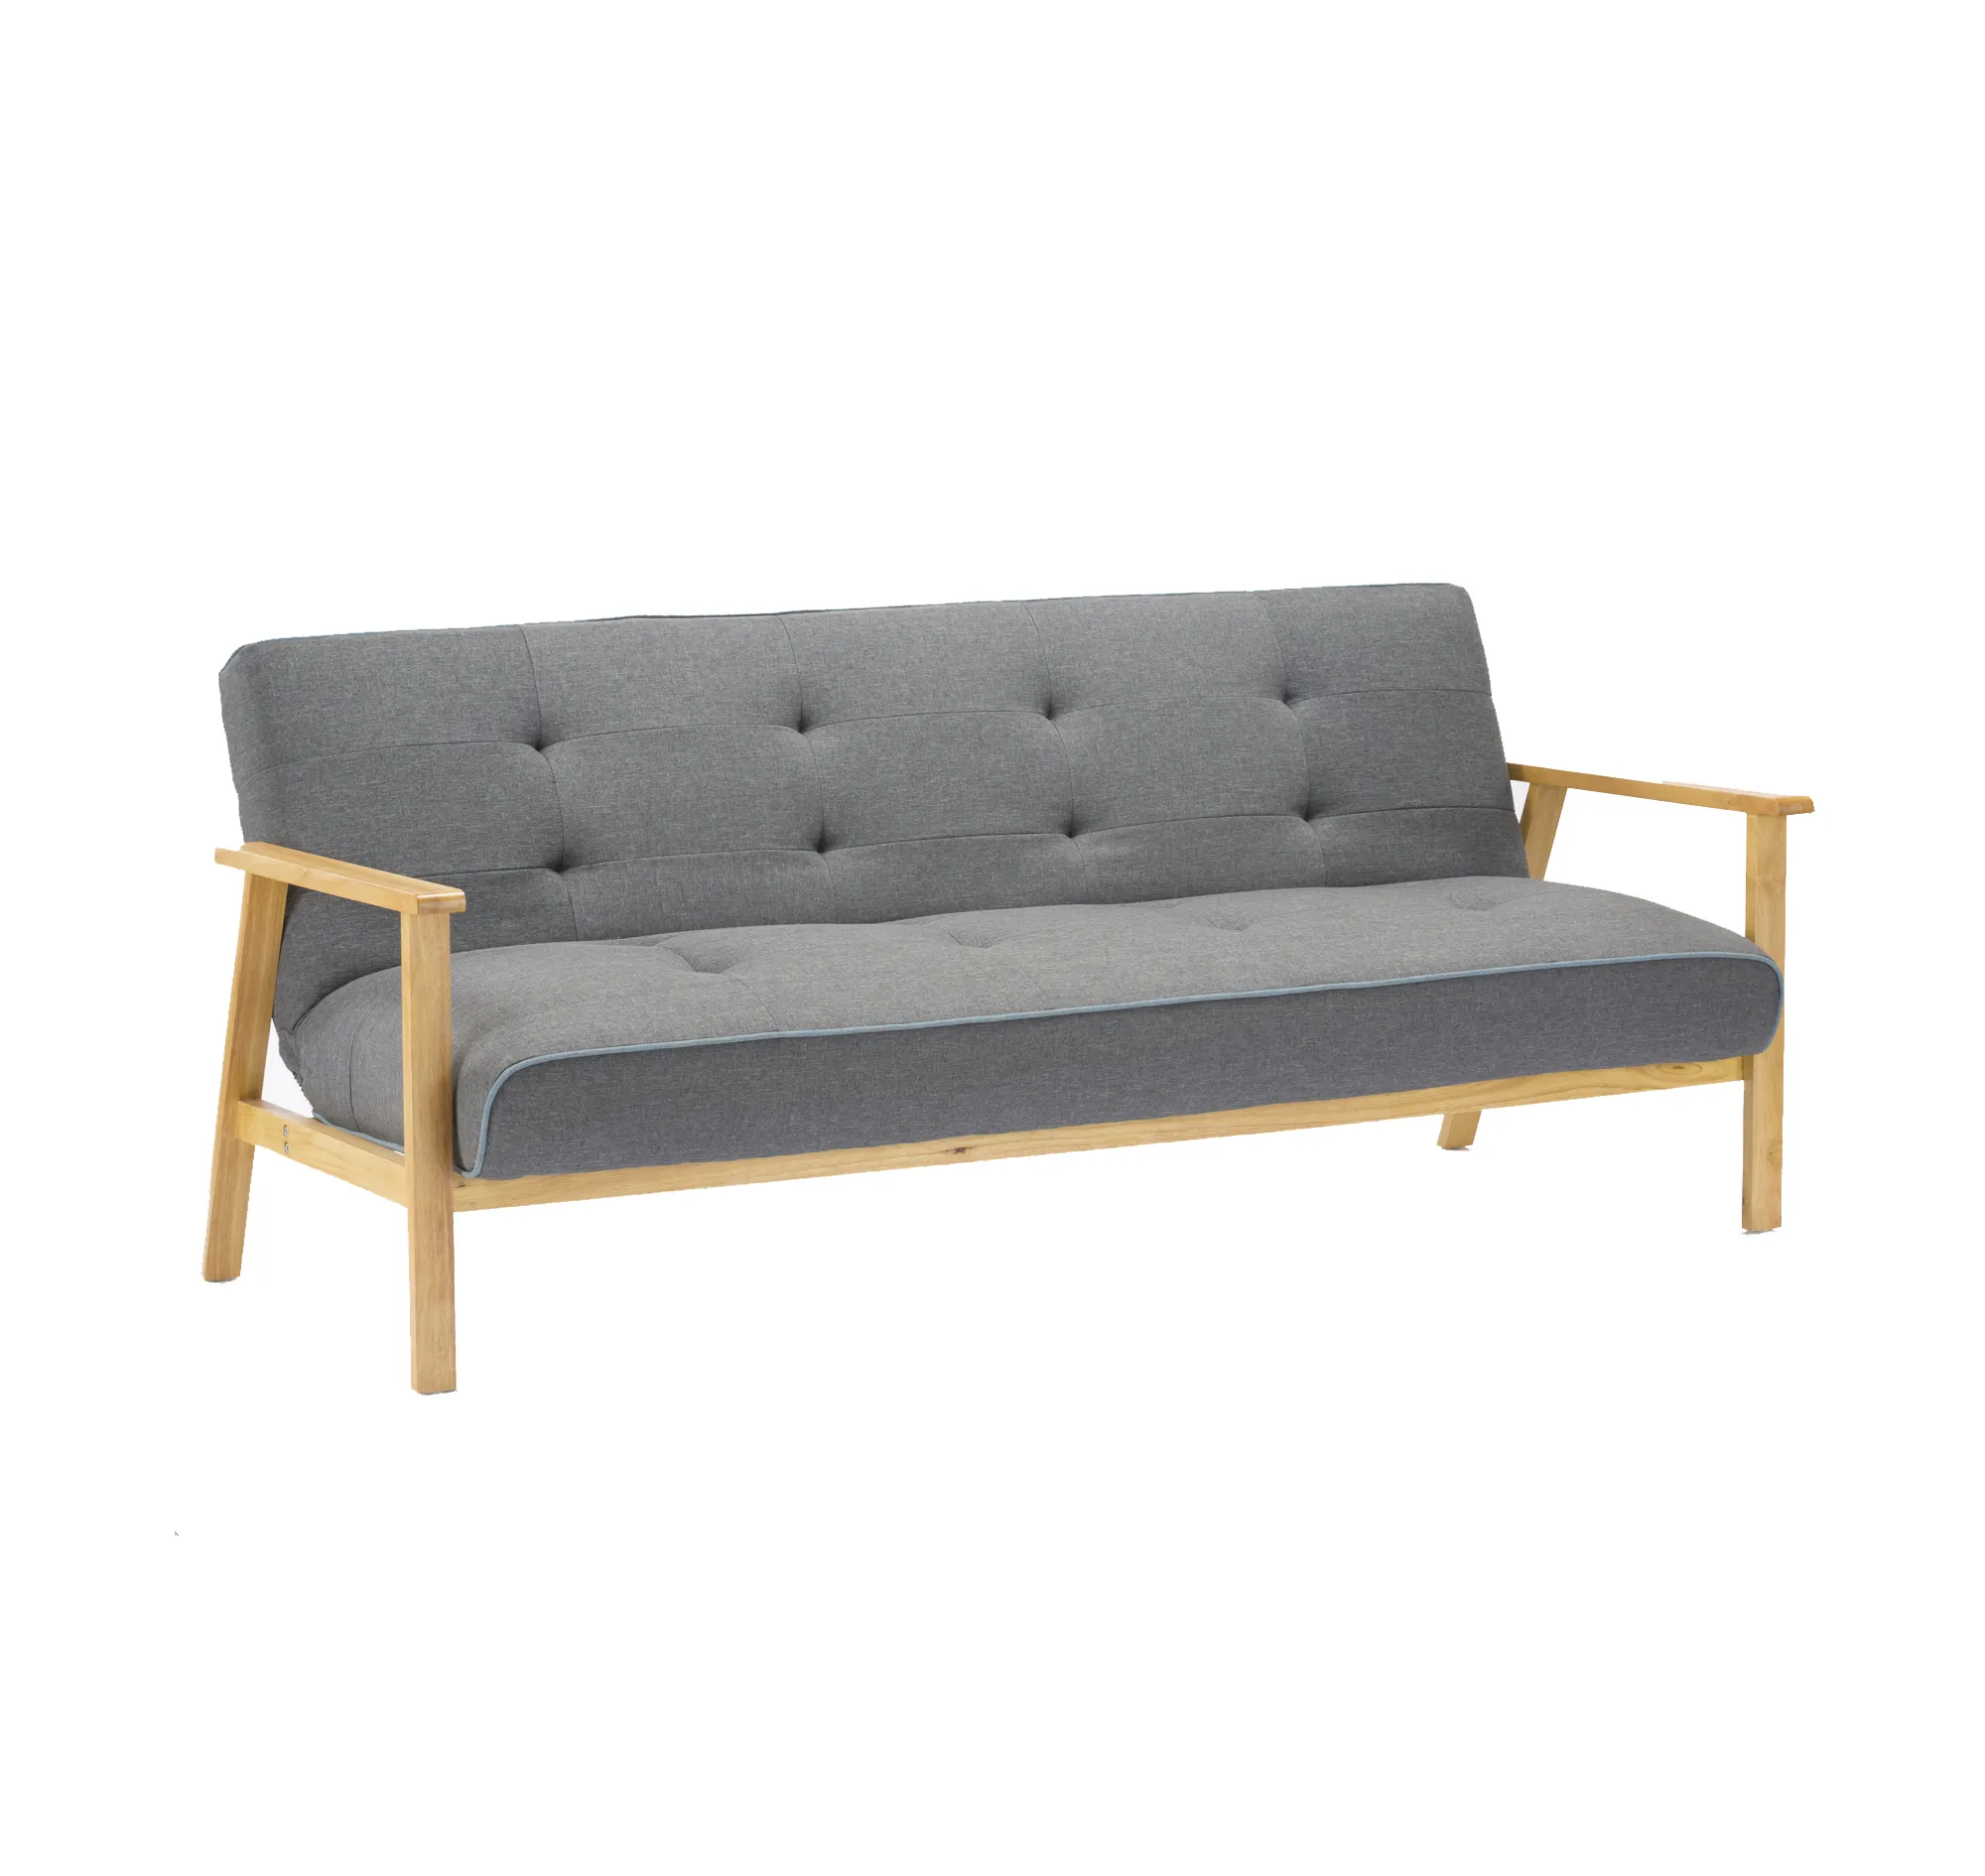 Japanese Design Simple Sofa,3 Three Seaters Sofa with Metal Frame for Hotel,Restaurant,Cafe